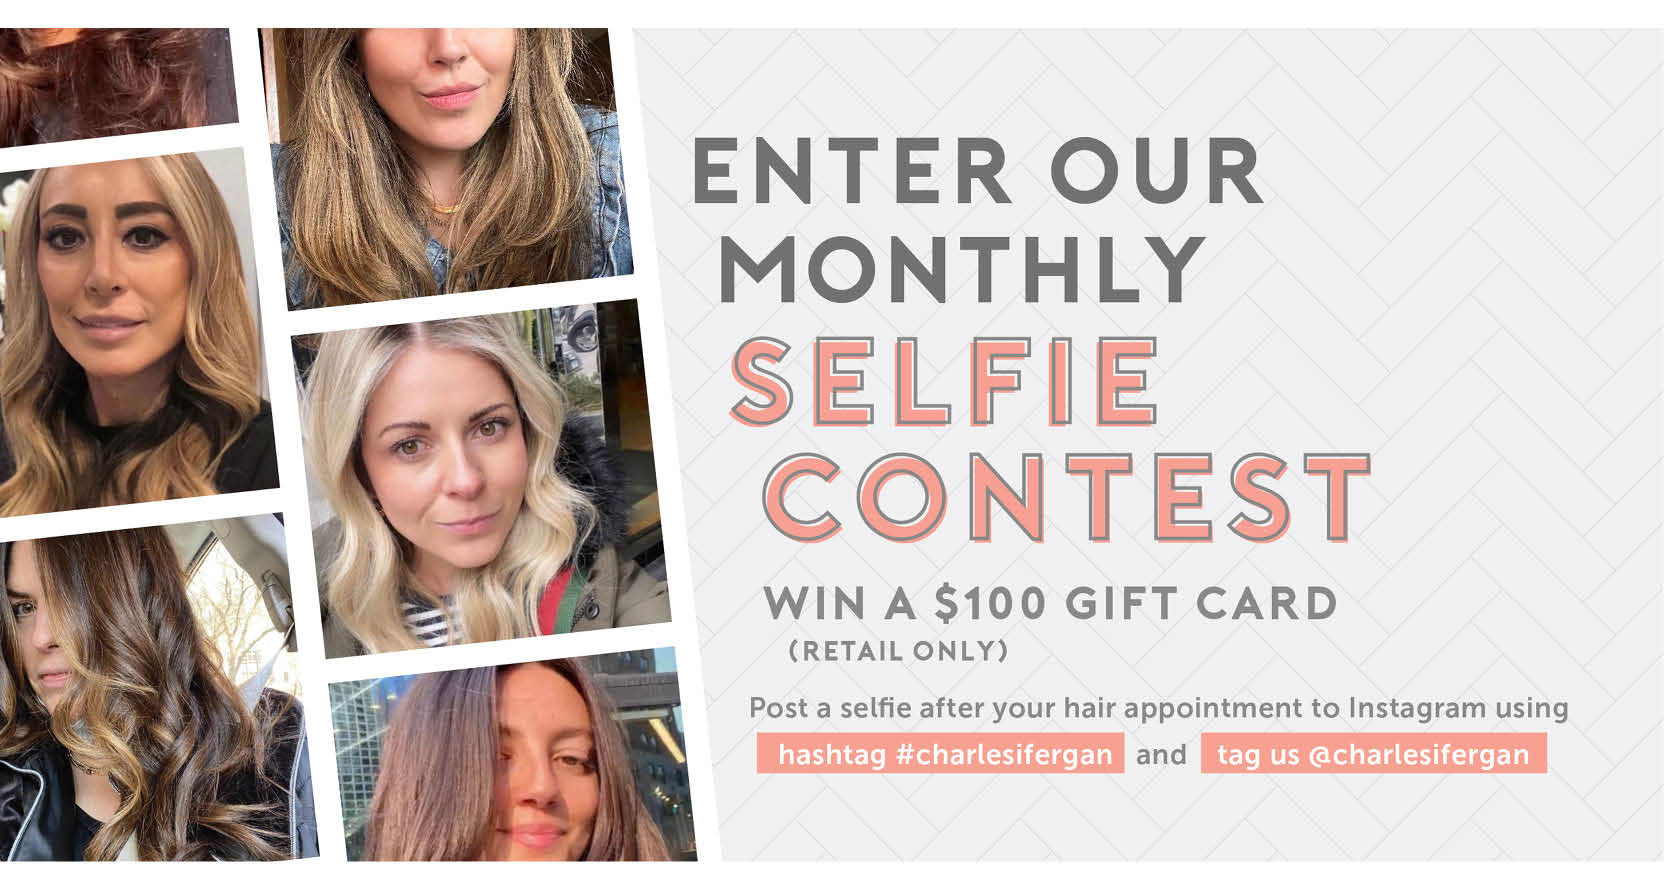 Enter our monthly selfie contest for a chance to win a $100 (retail only) gift card. Post a selfie after your hair appointment to Instagram using hashtag #charlesifergan and tag us @charlesifergan.